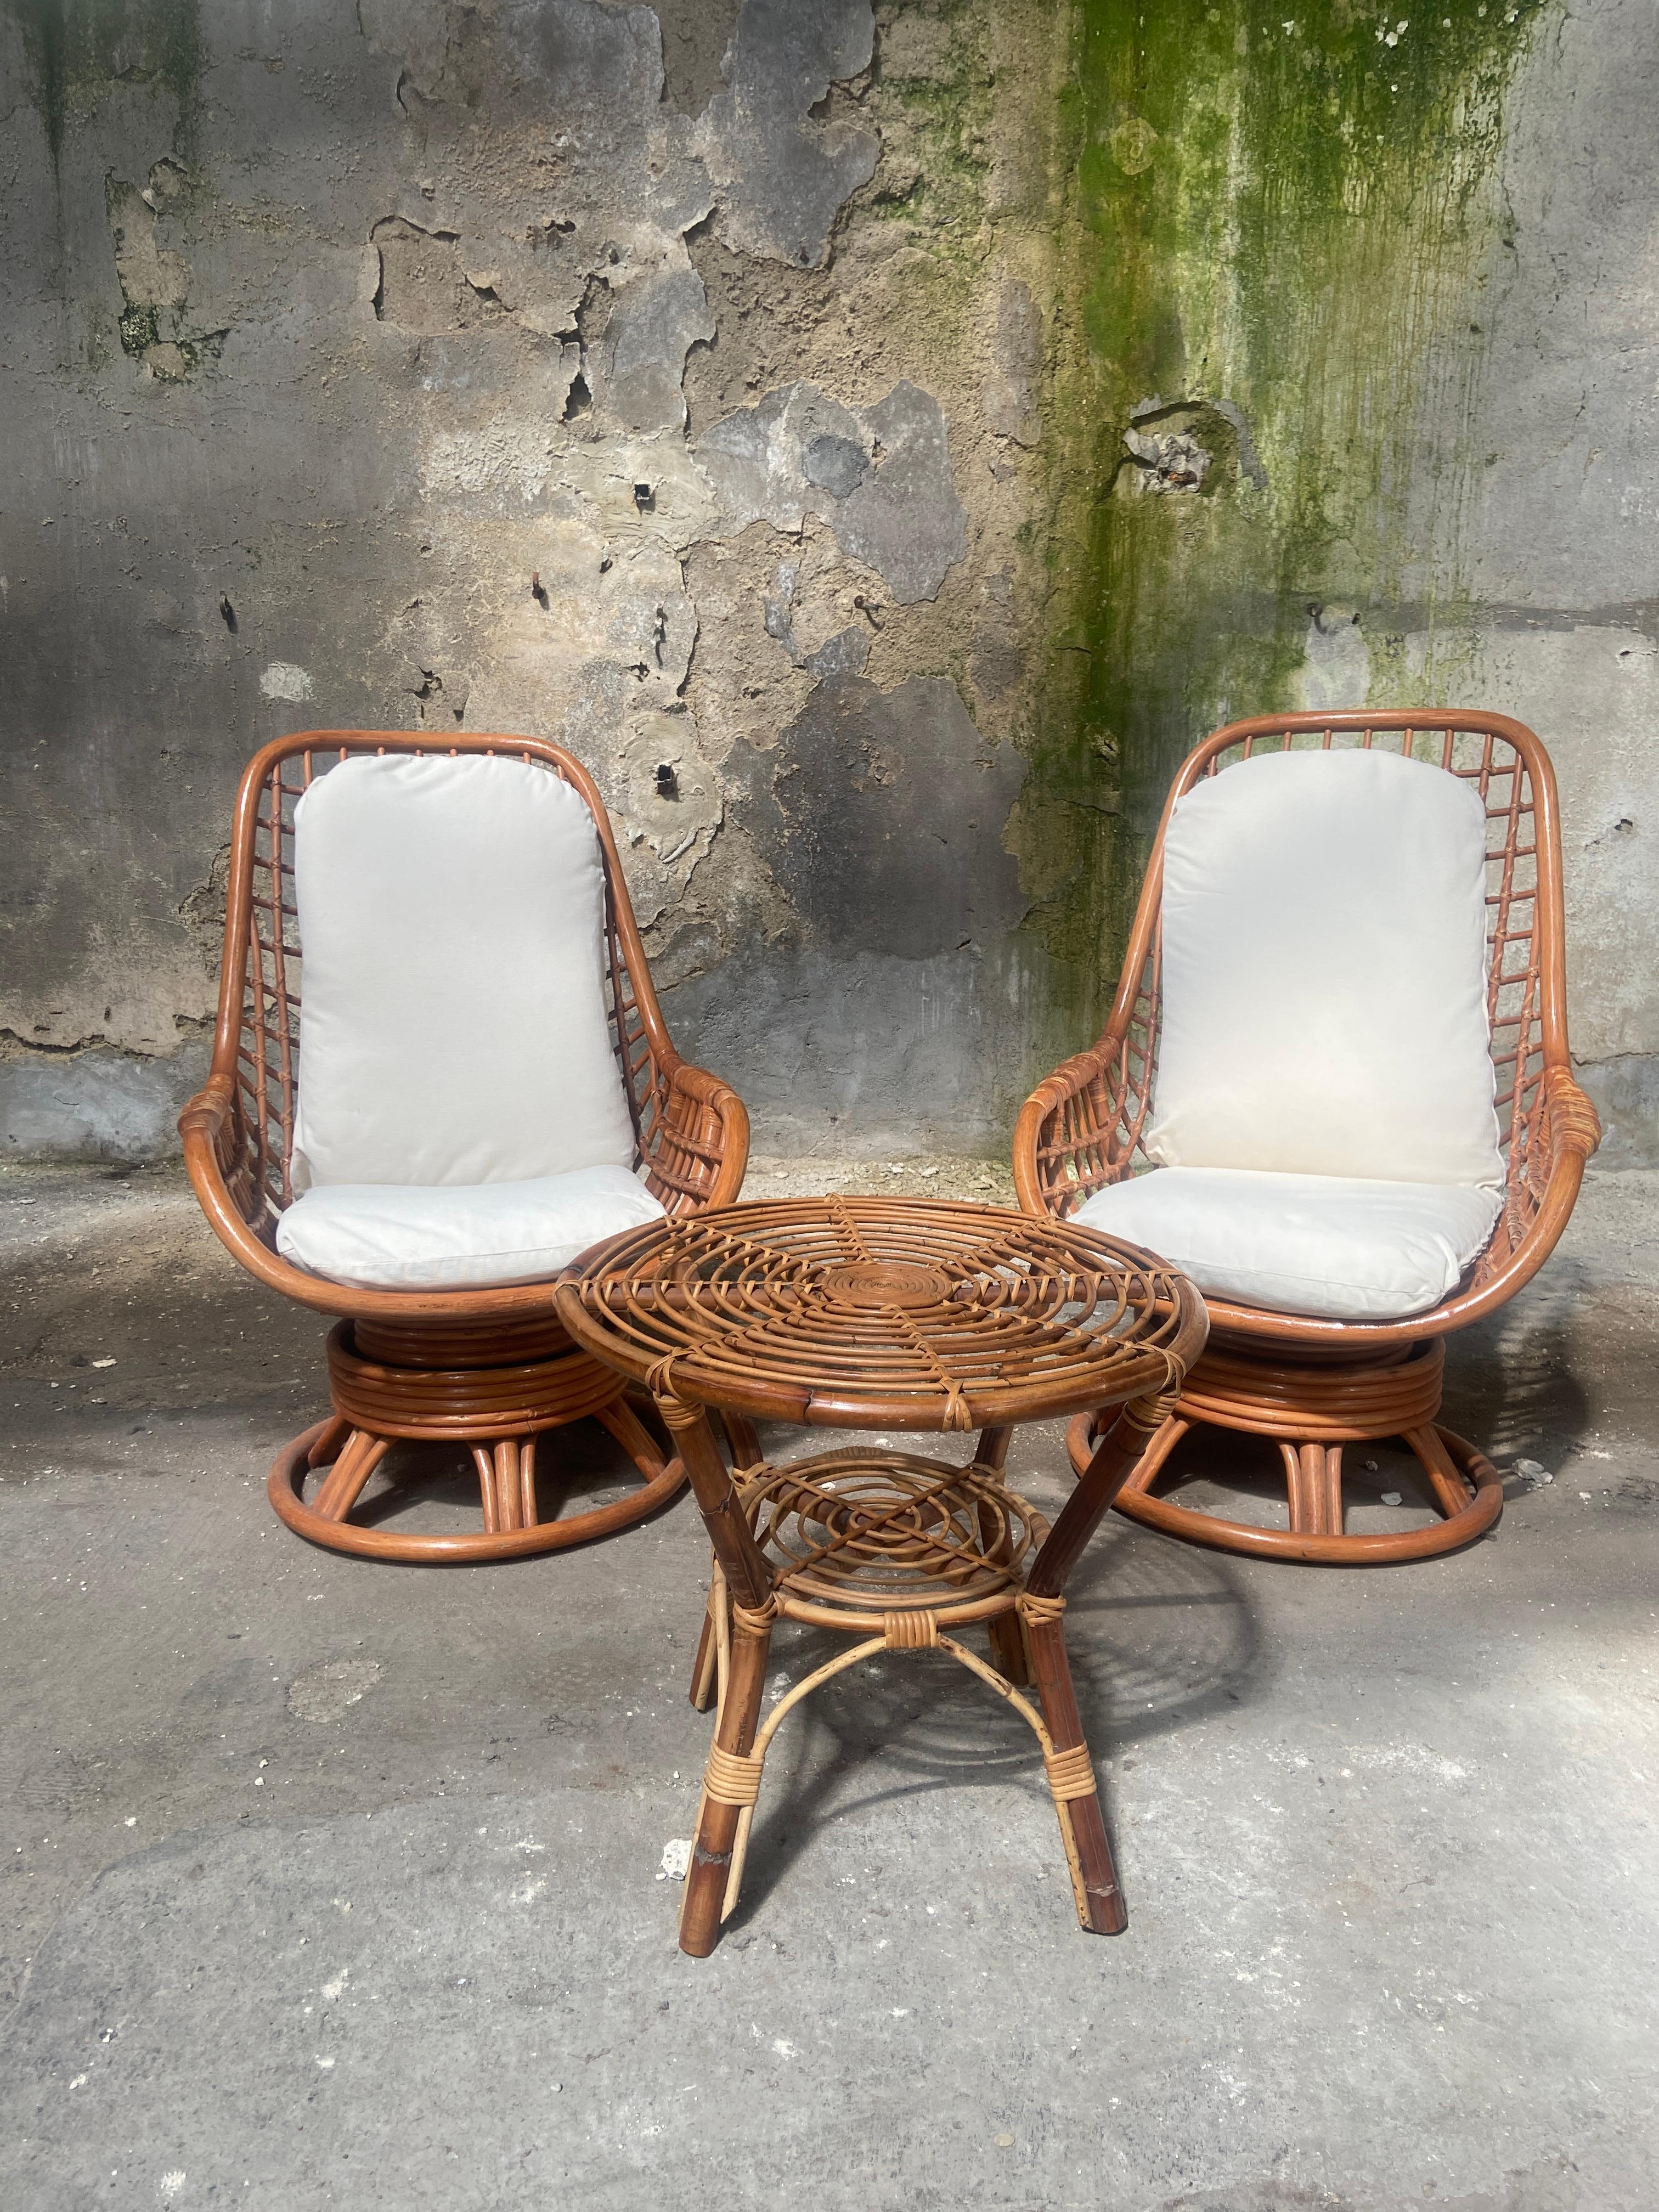 Mid-Century Modern Bamboo and Rattan living room set consists of  two comfortable armchairs and one side table.
The armchairs have their original fabric cushions.
The set is in really good vintage conditions with a beautiful patina due to age and use